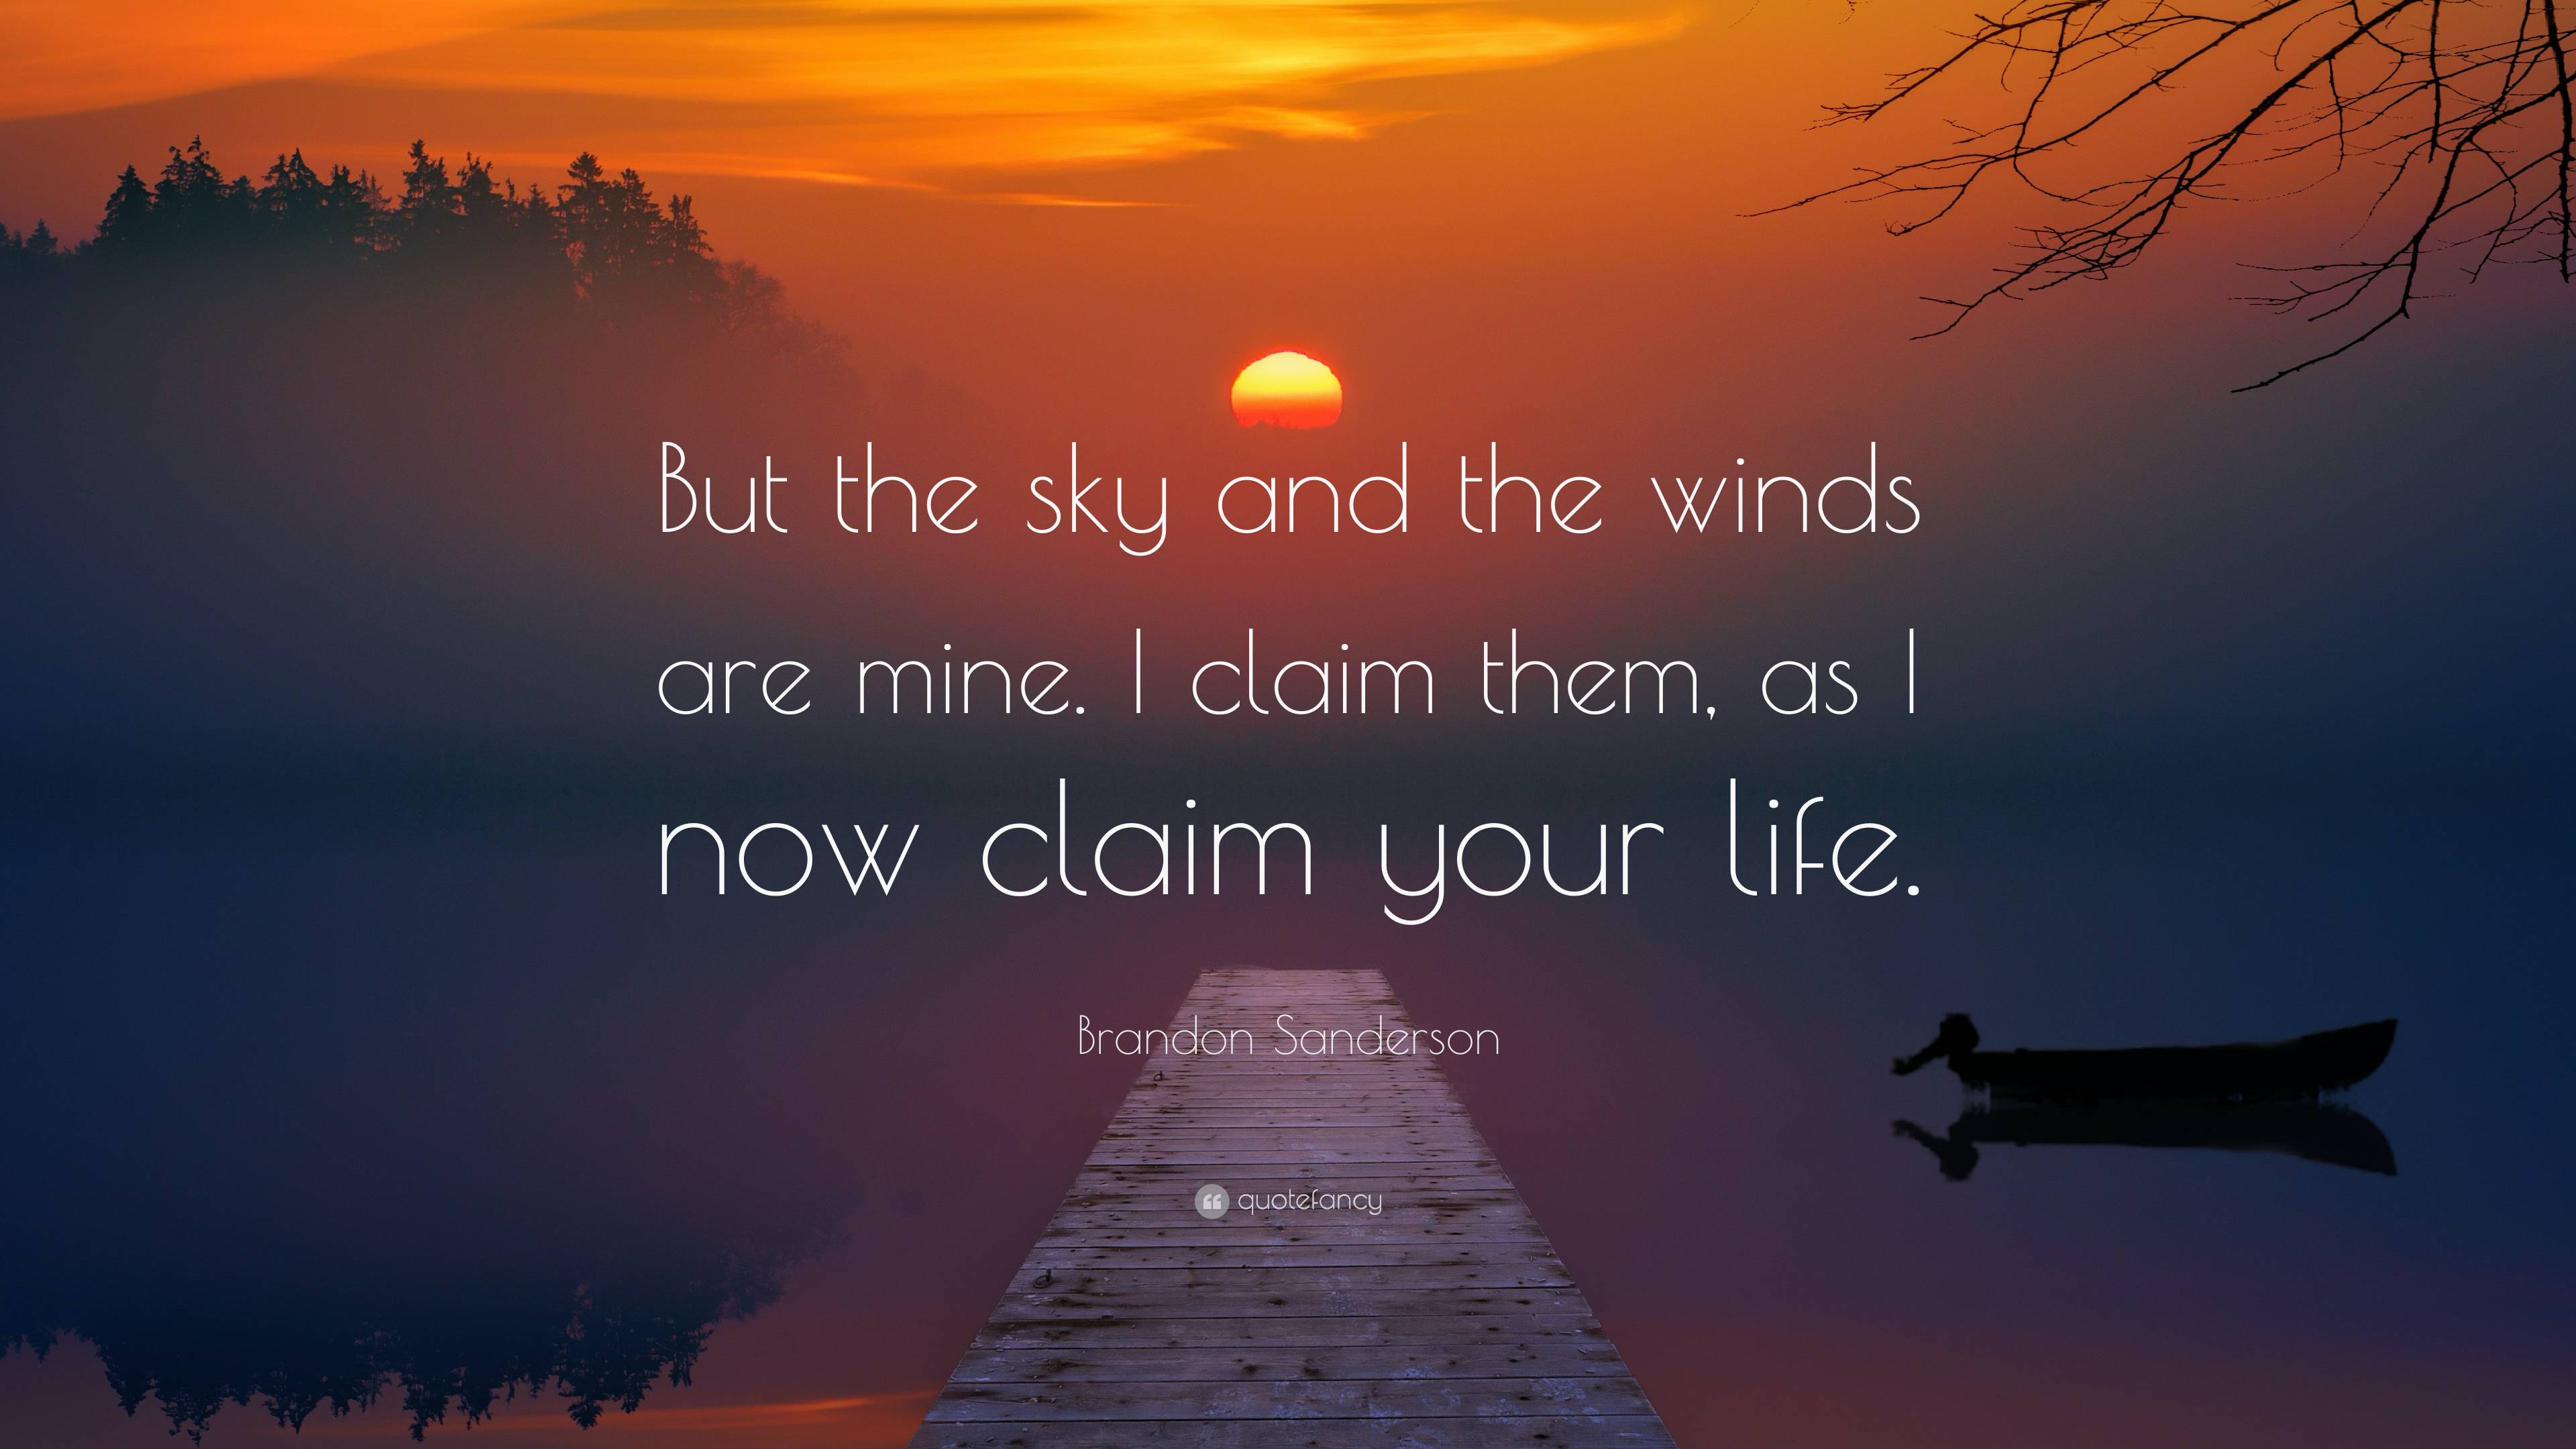 Brandon Sanderson Quote: “But the sky and the winds are mine. I claim ...